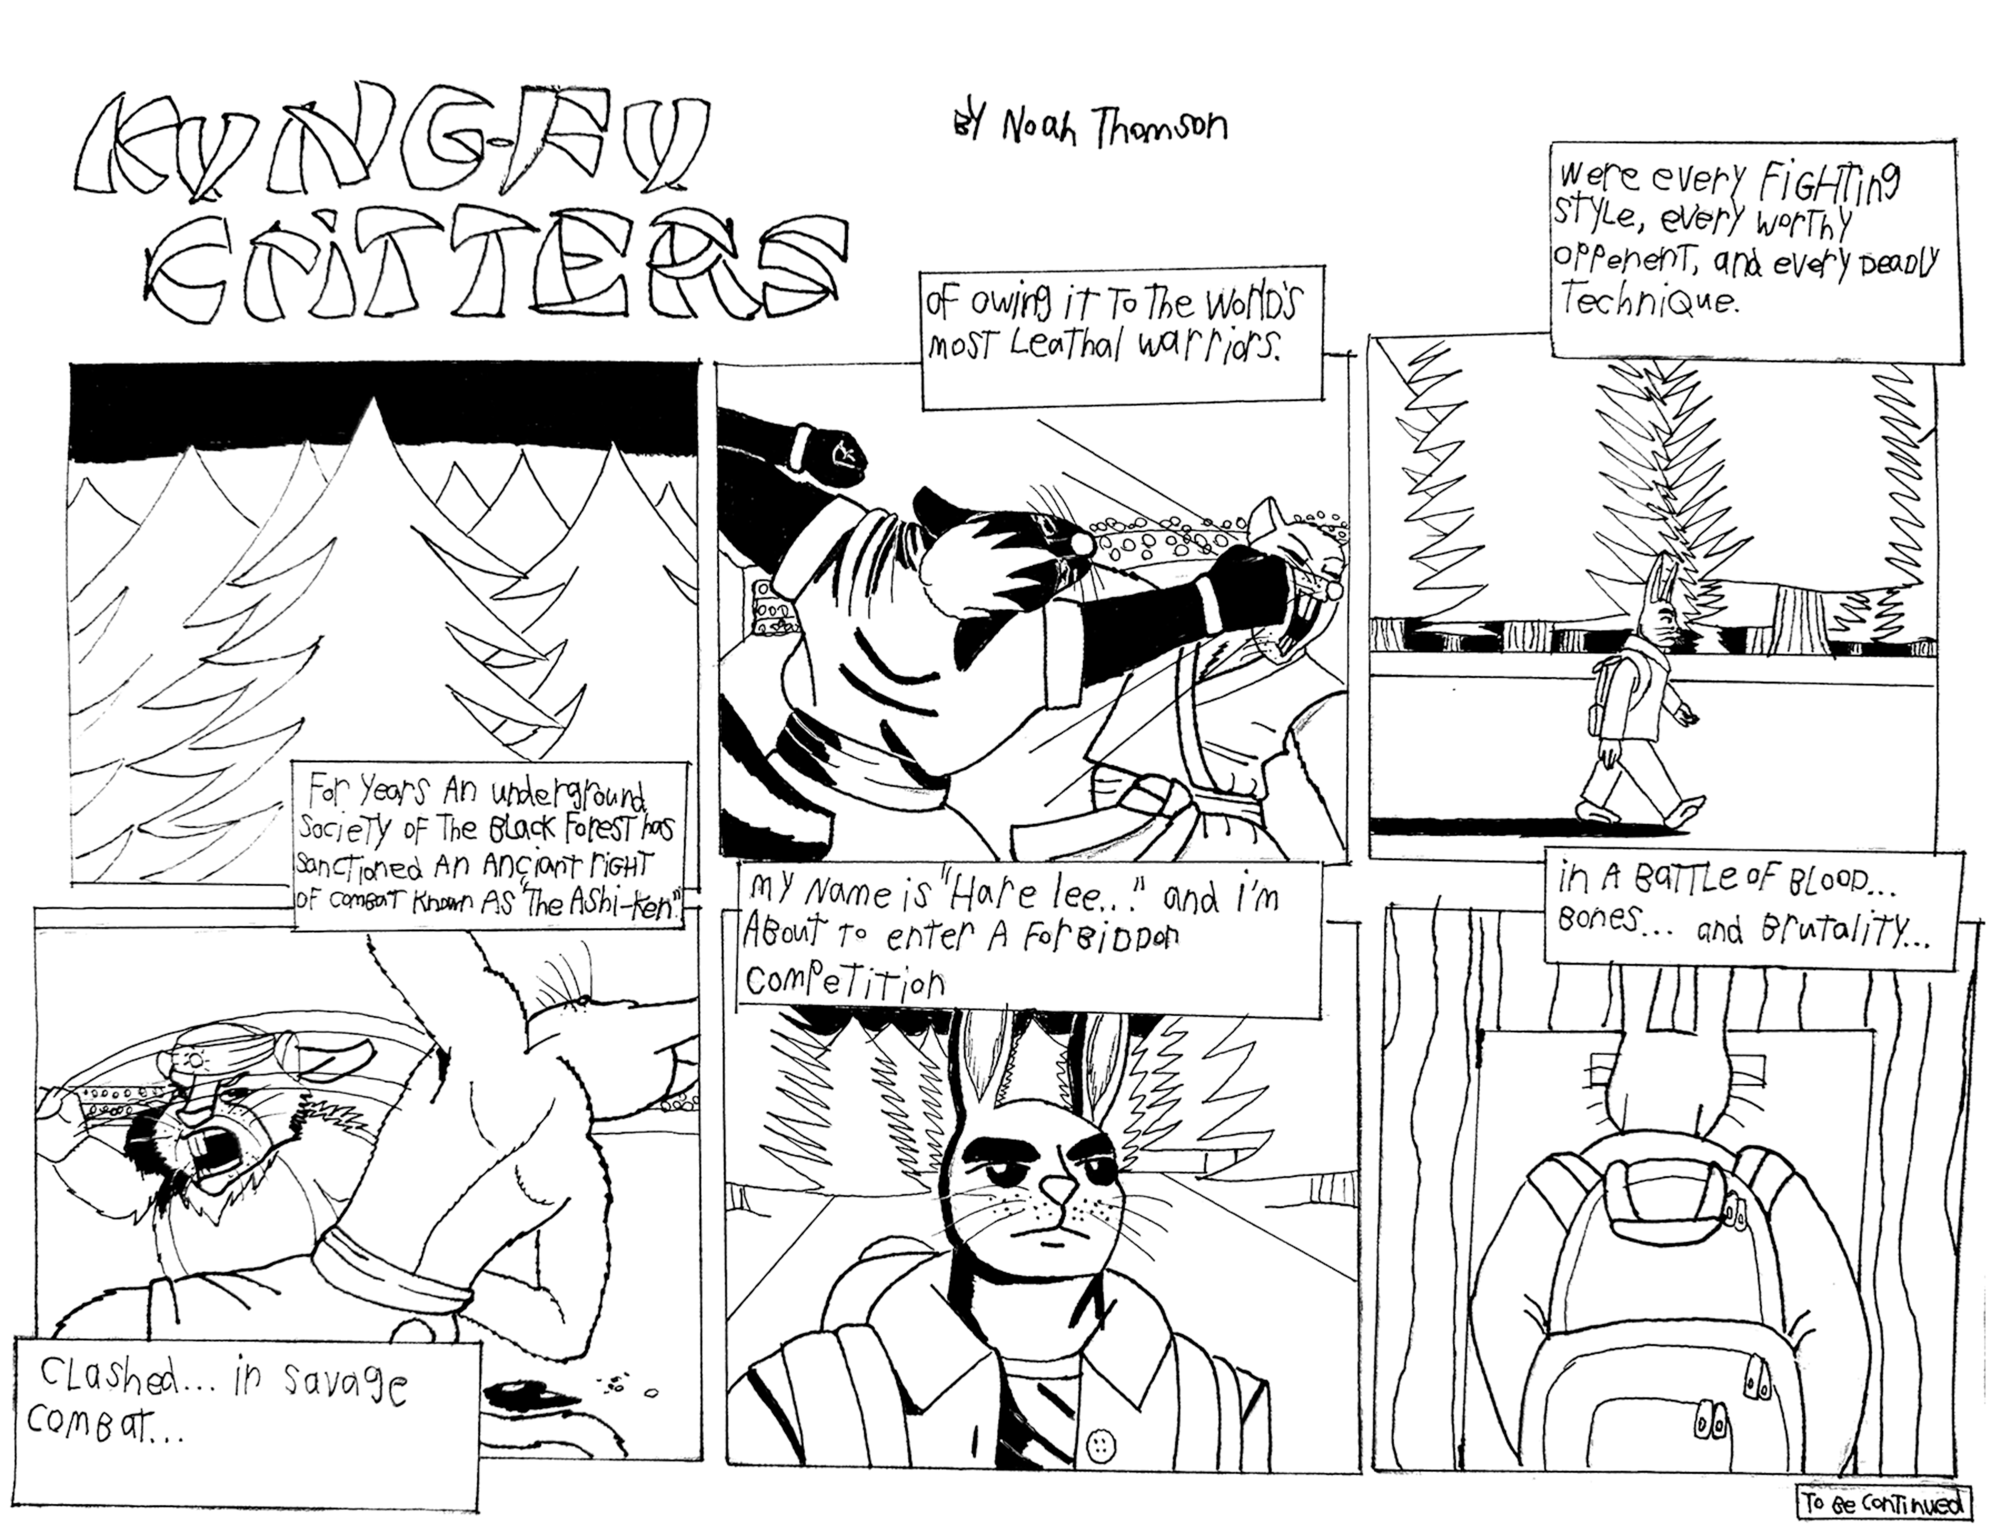 Kung Fu Critters, Issue 1